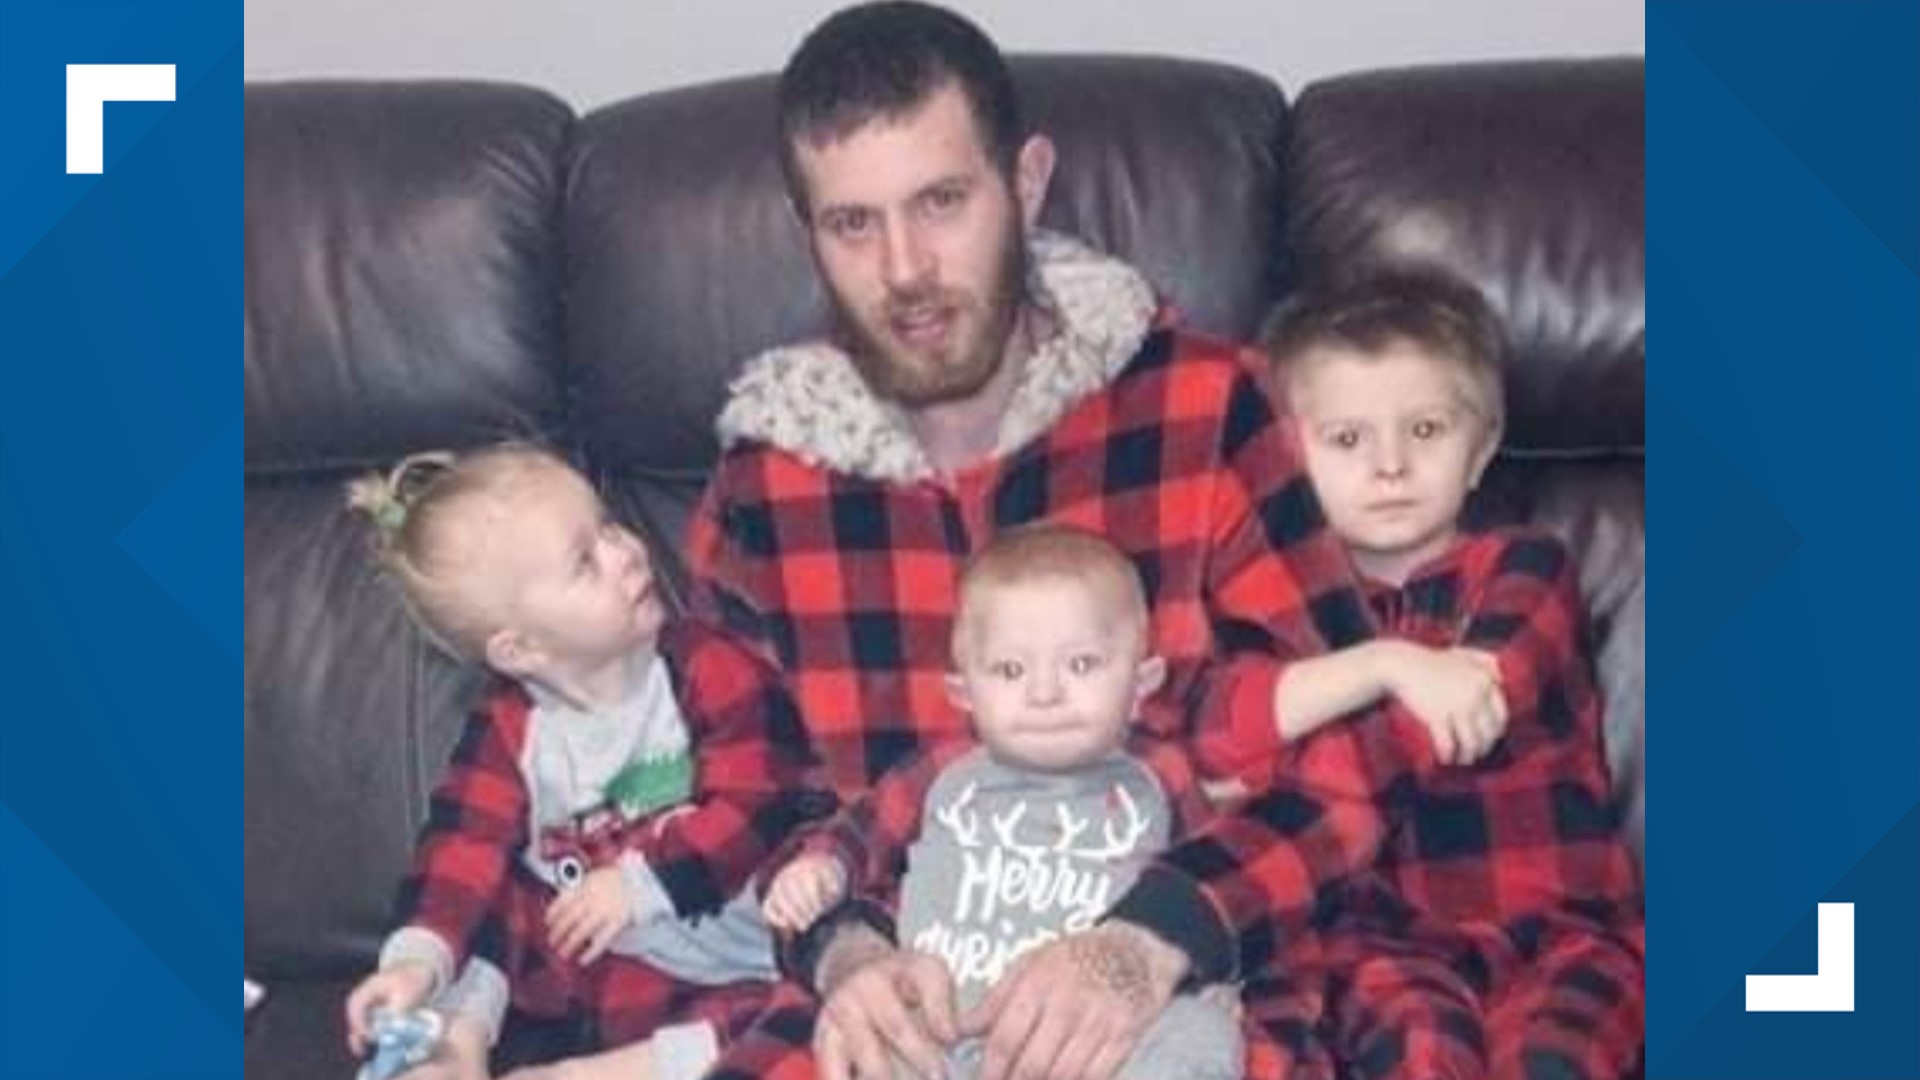 Kyle Moorman had "acute ethanol intoxication" when he and his three young children drowned in a pond near Bluff and Troy in July.